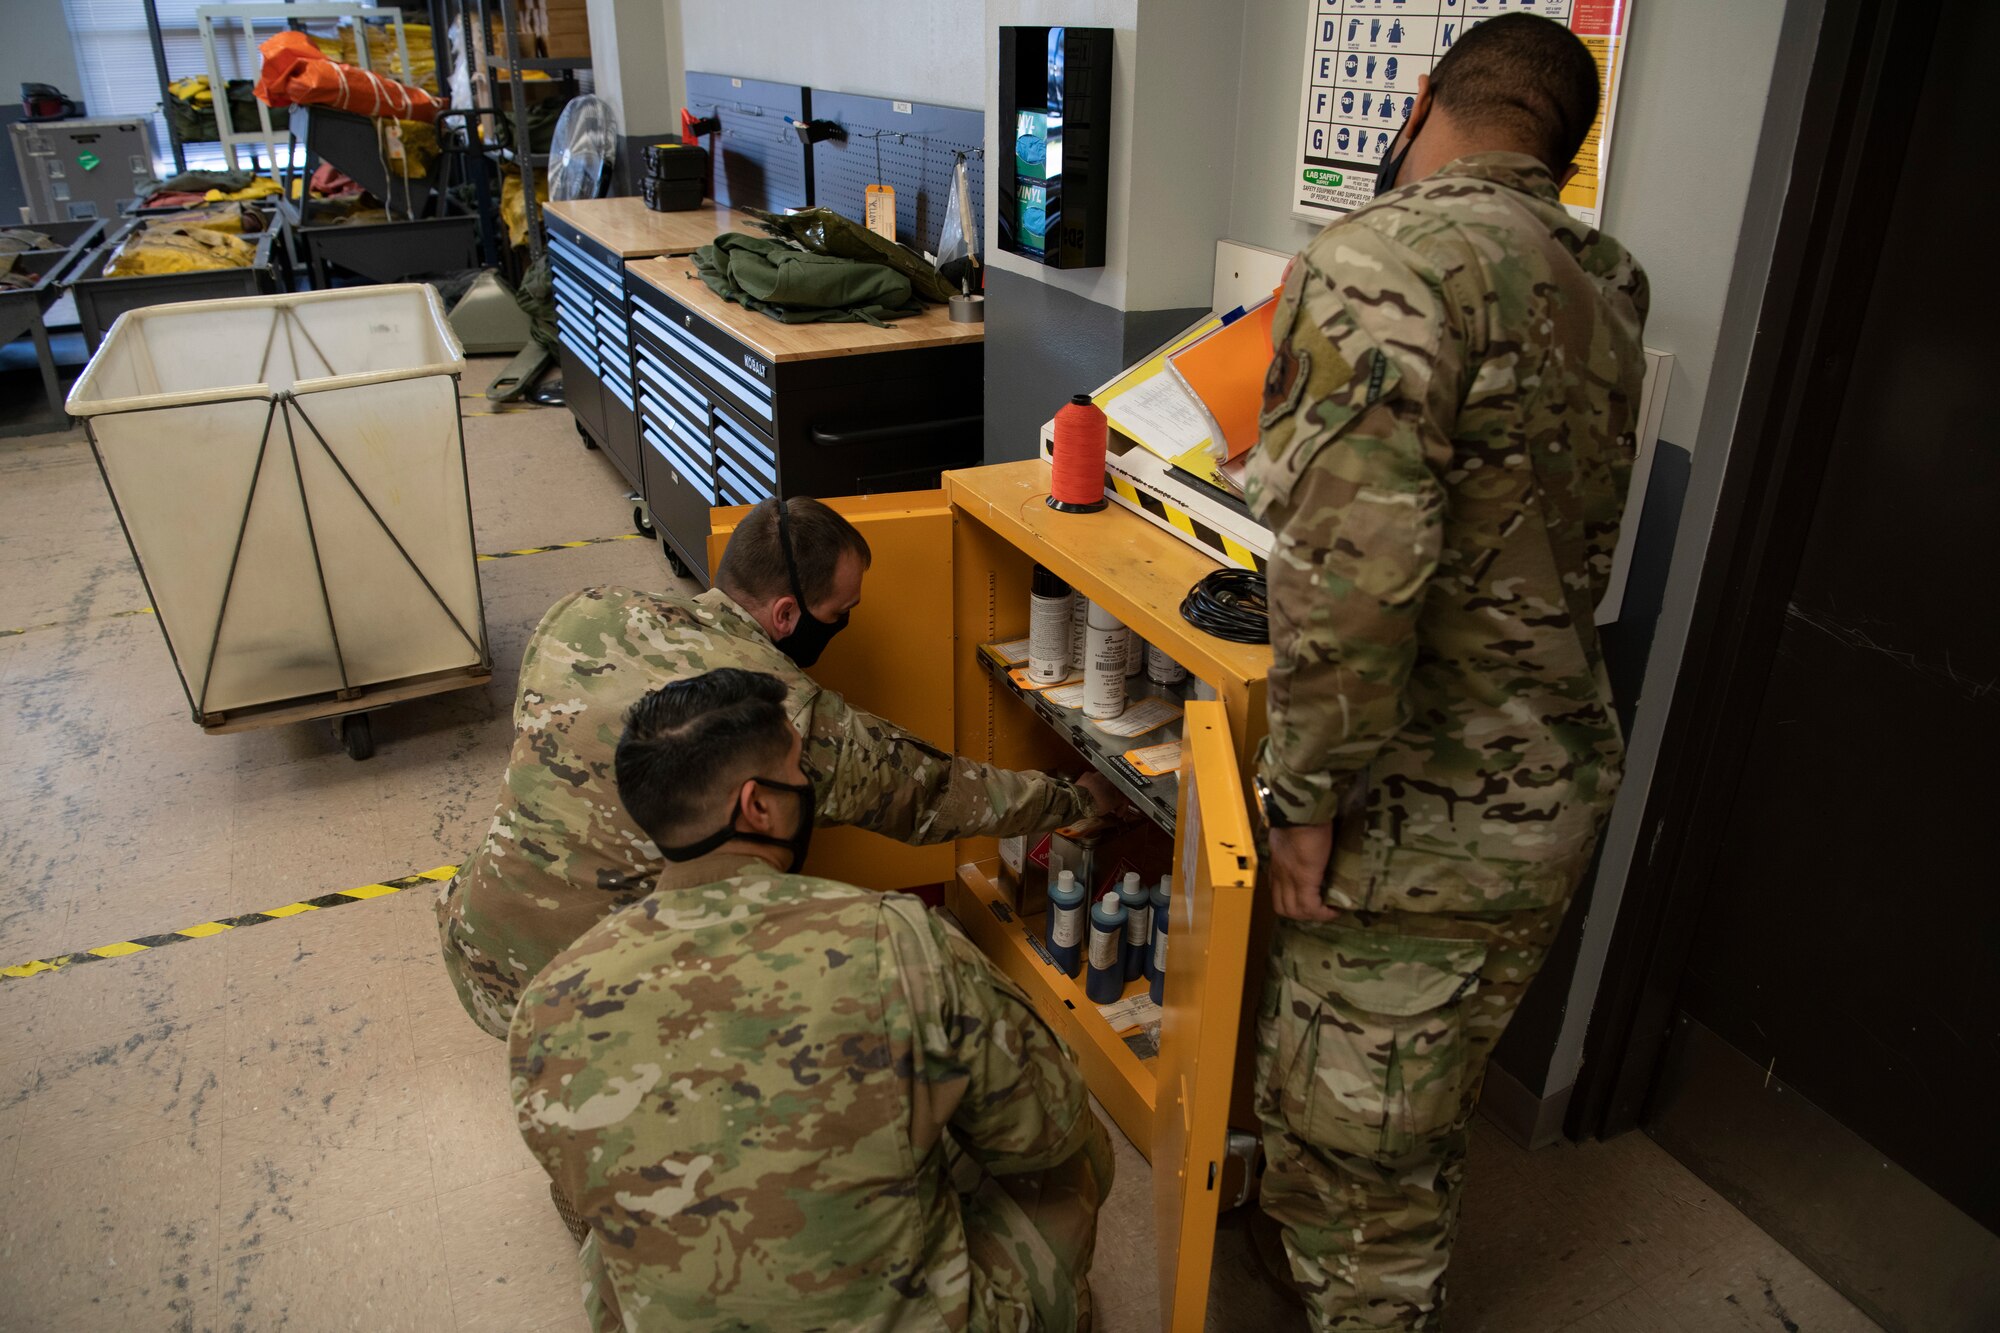 U.S. Air Force Staff Sgt. Kurtis Vandevender, left, a 1st Special Operations Wing occupational safety technician, inspects a chemical storage locker with Senior Airman David Rodriguez, center, and Senior Airman Daniel Wilson, both 1st Special Operations Support Squadron aircrew flight equipment technicians, Feb. 15, 2022, at Hurlburt Field, Florida.